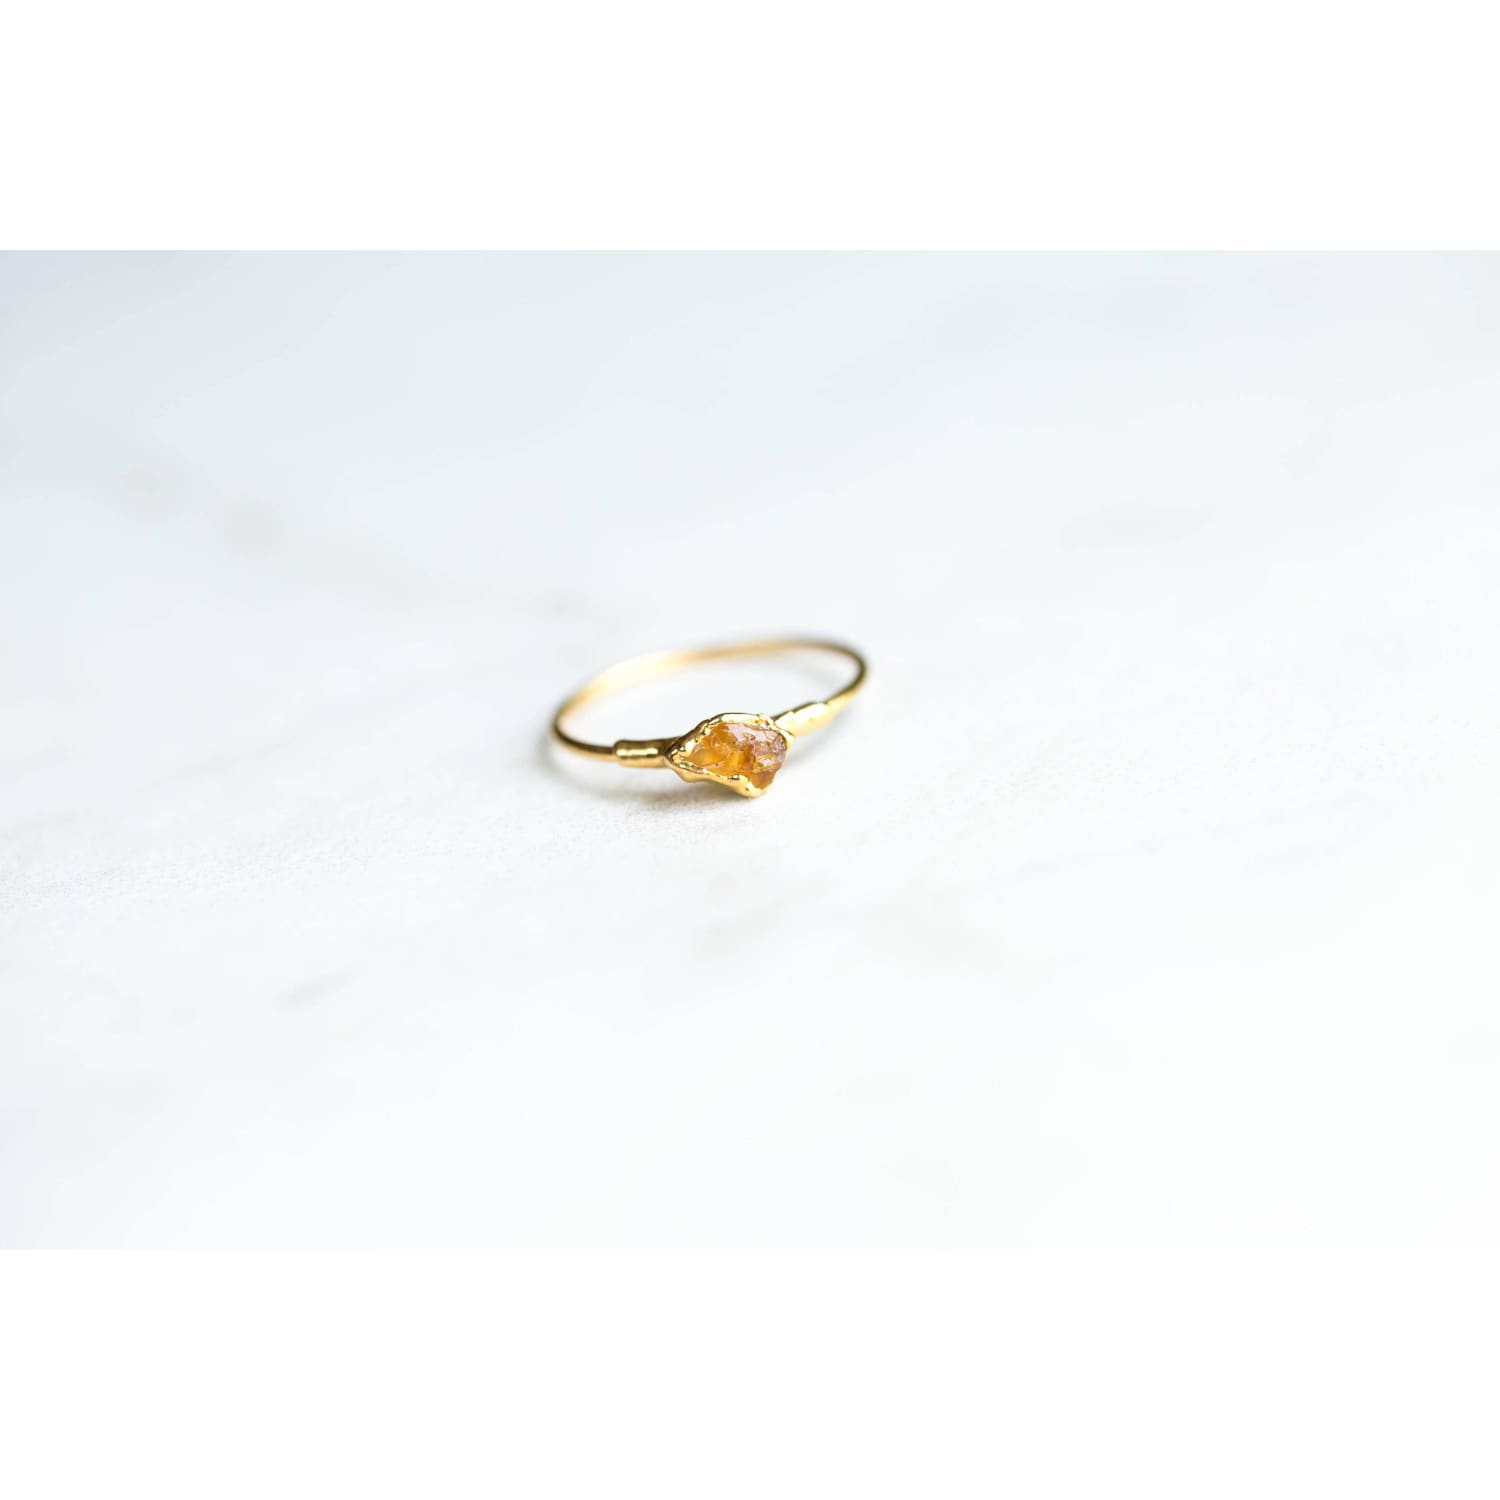 Dainty Raw Citrine Ring in Rose Gold Gemstone Jewelry Rough